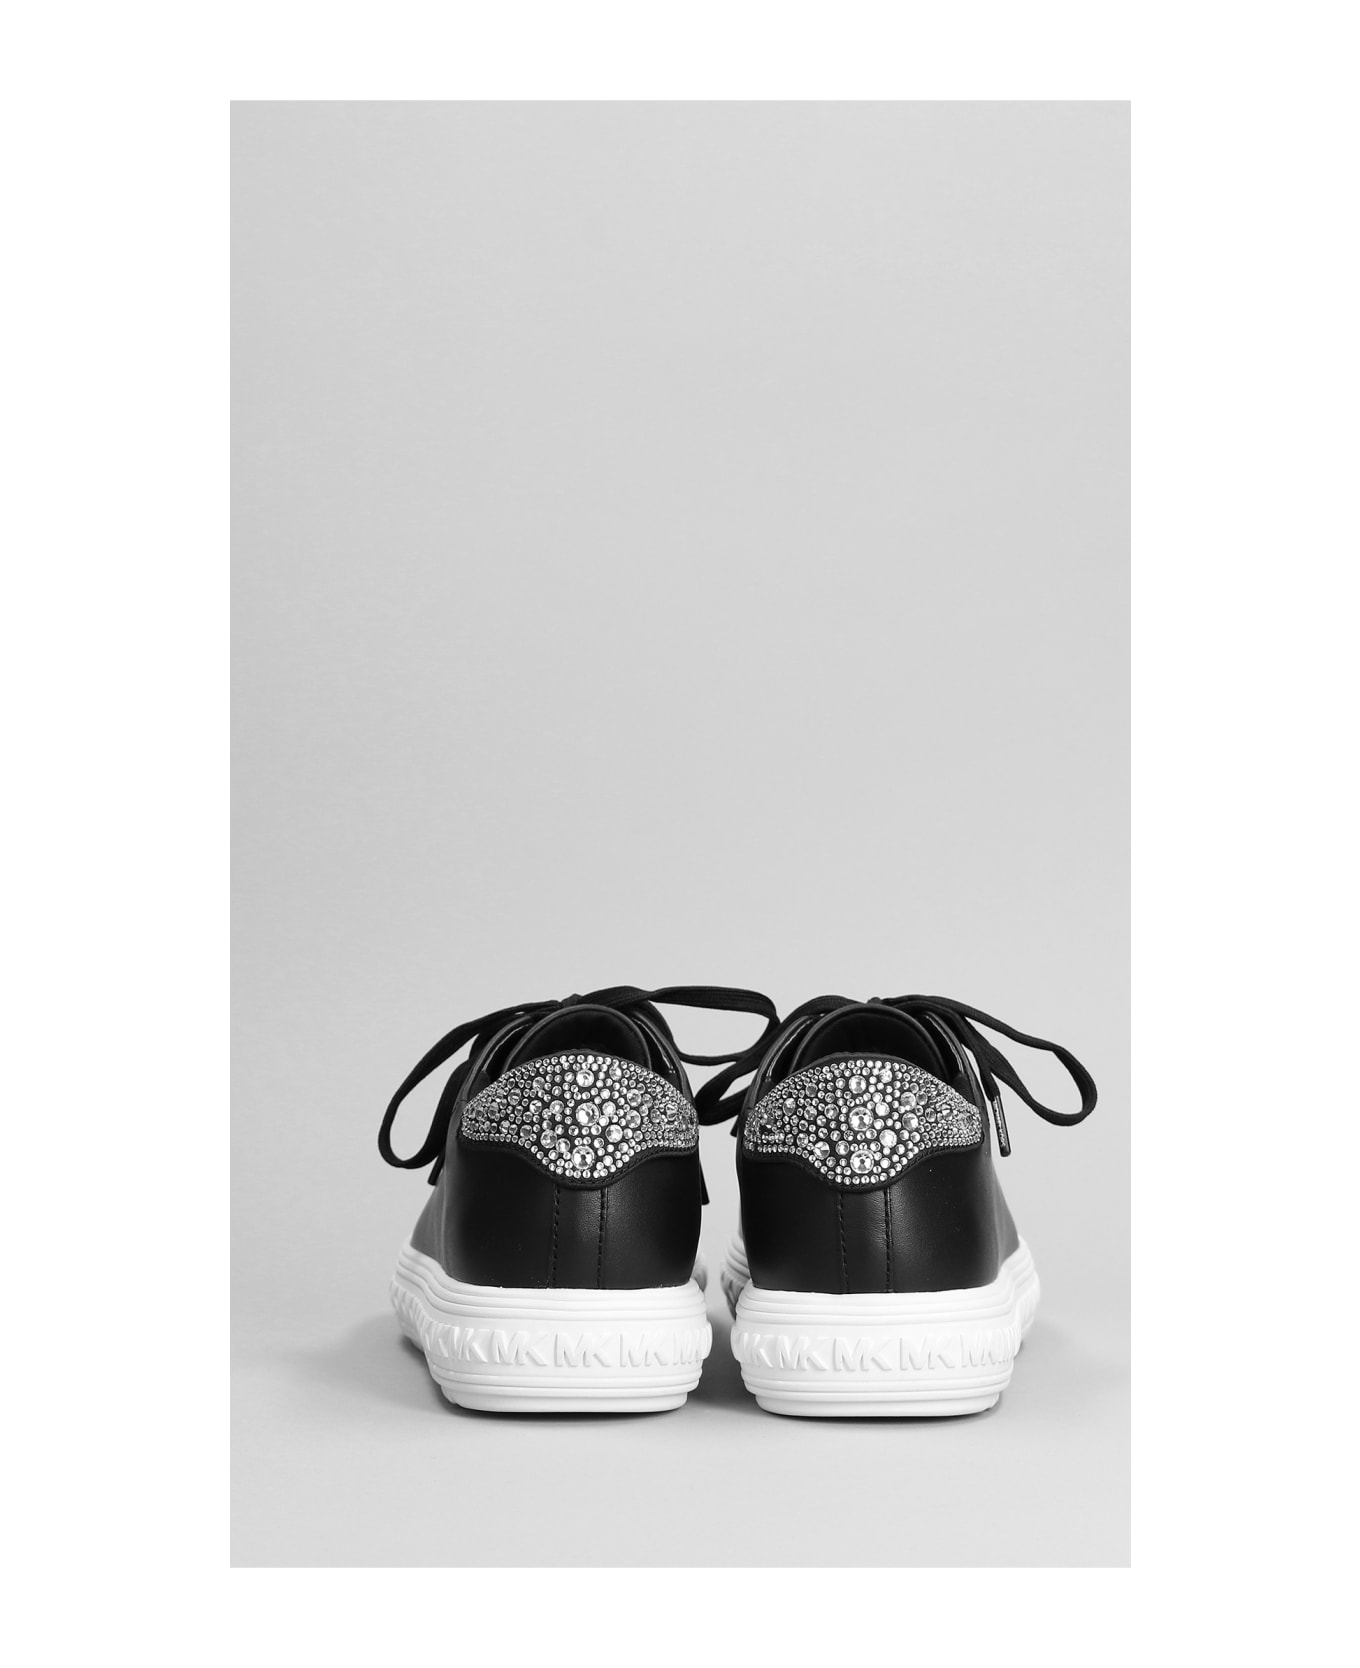 Michael Kors Grove Lake Up Sneakers In Black Leather And Fabric - black